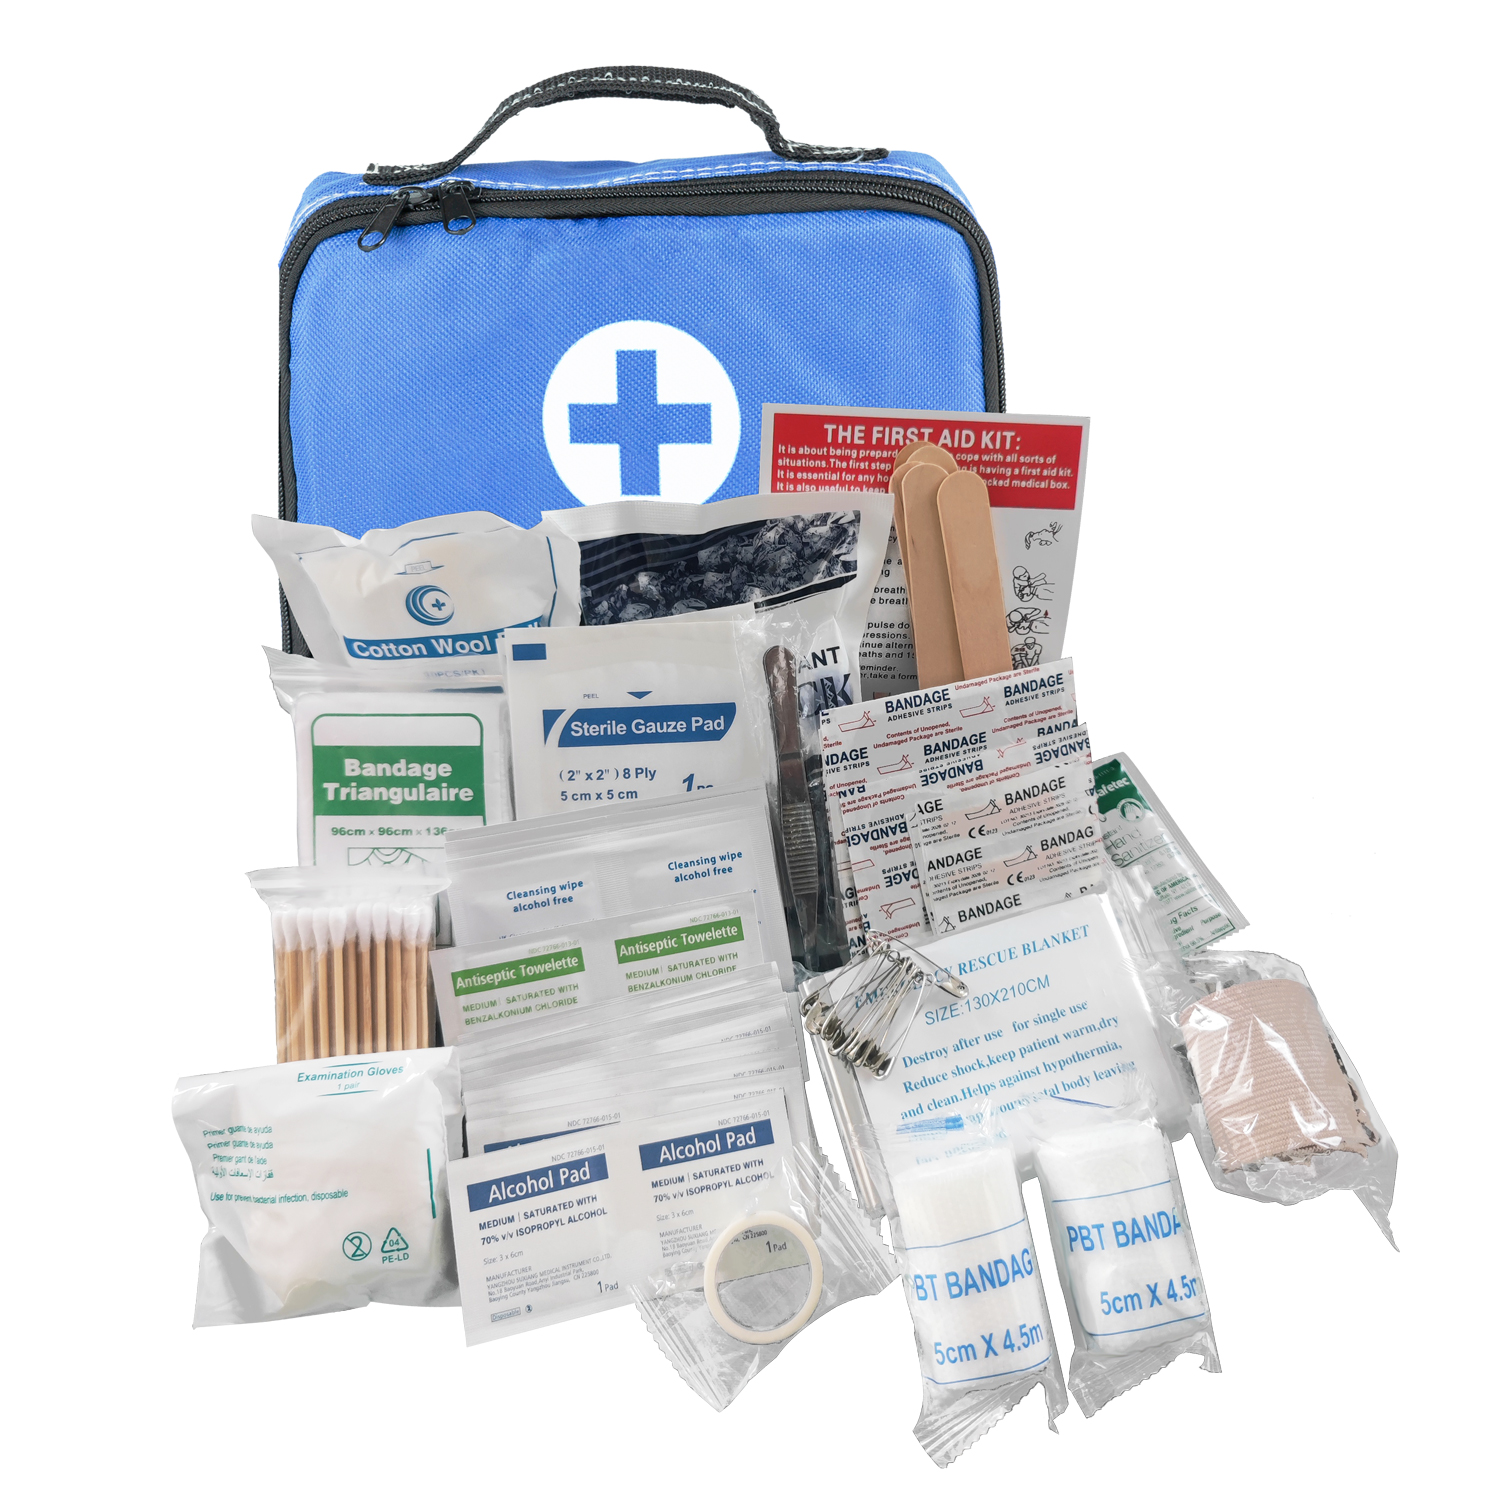 What are the steps in quality inspection of first aid kits?